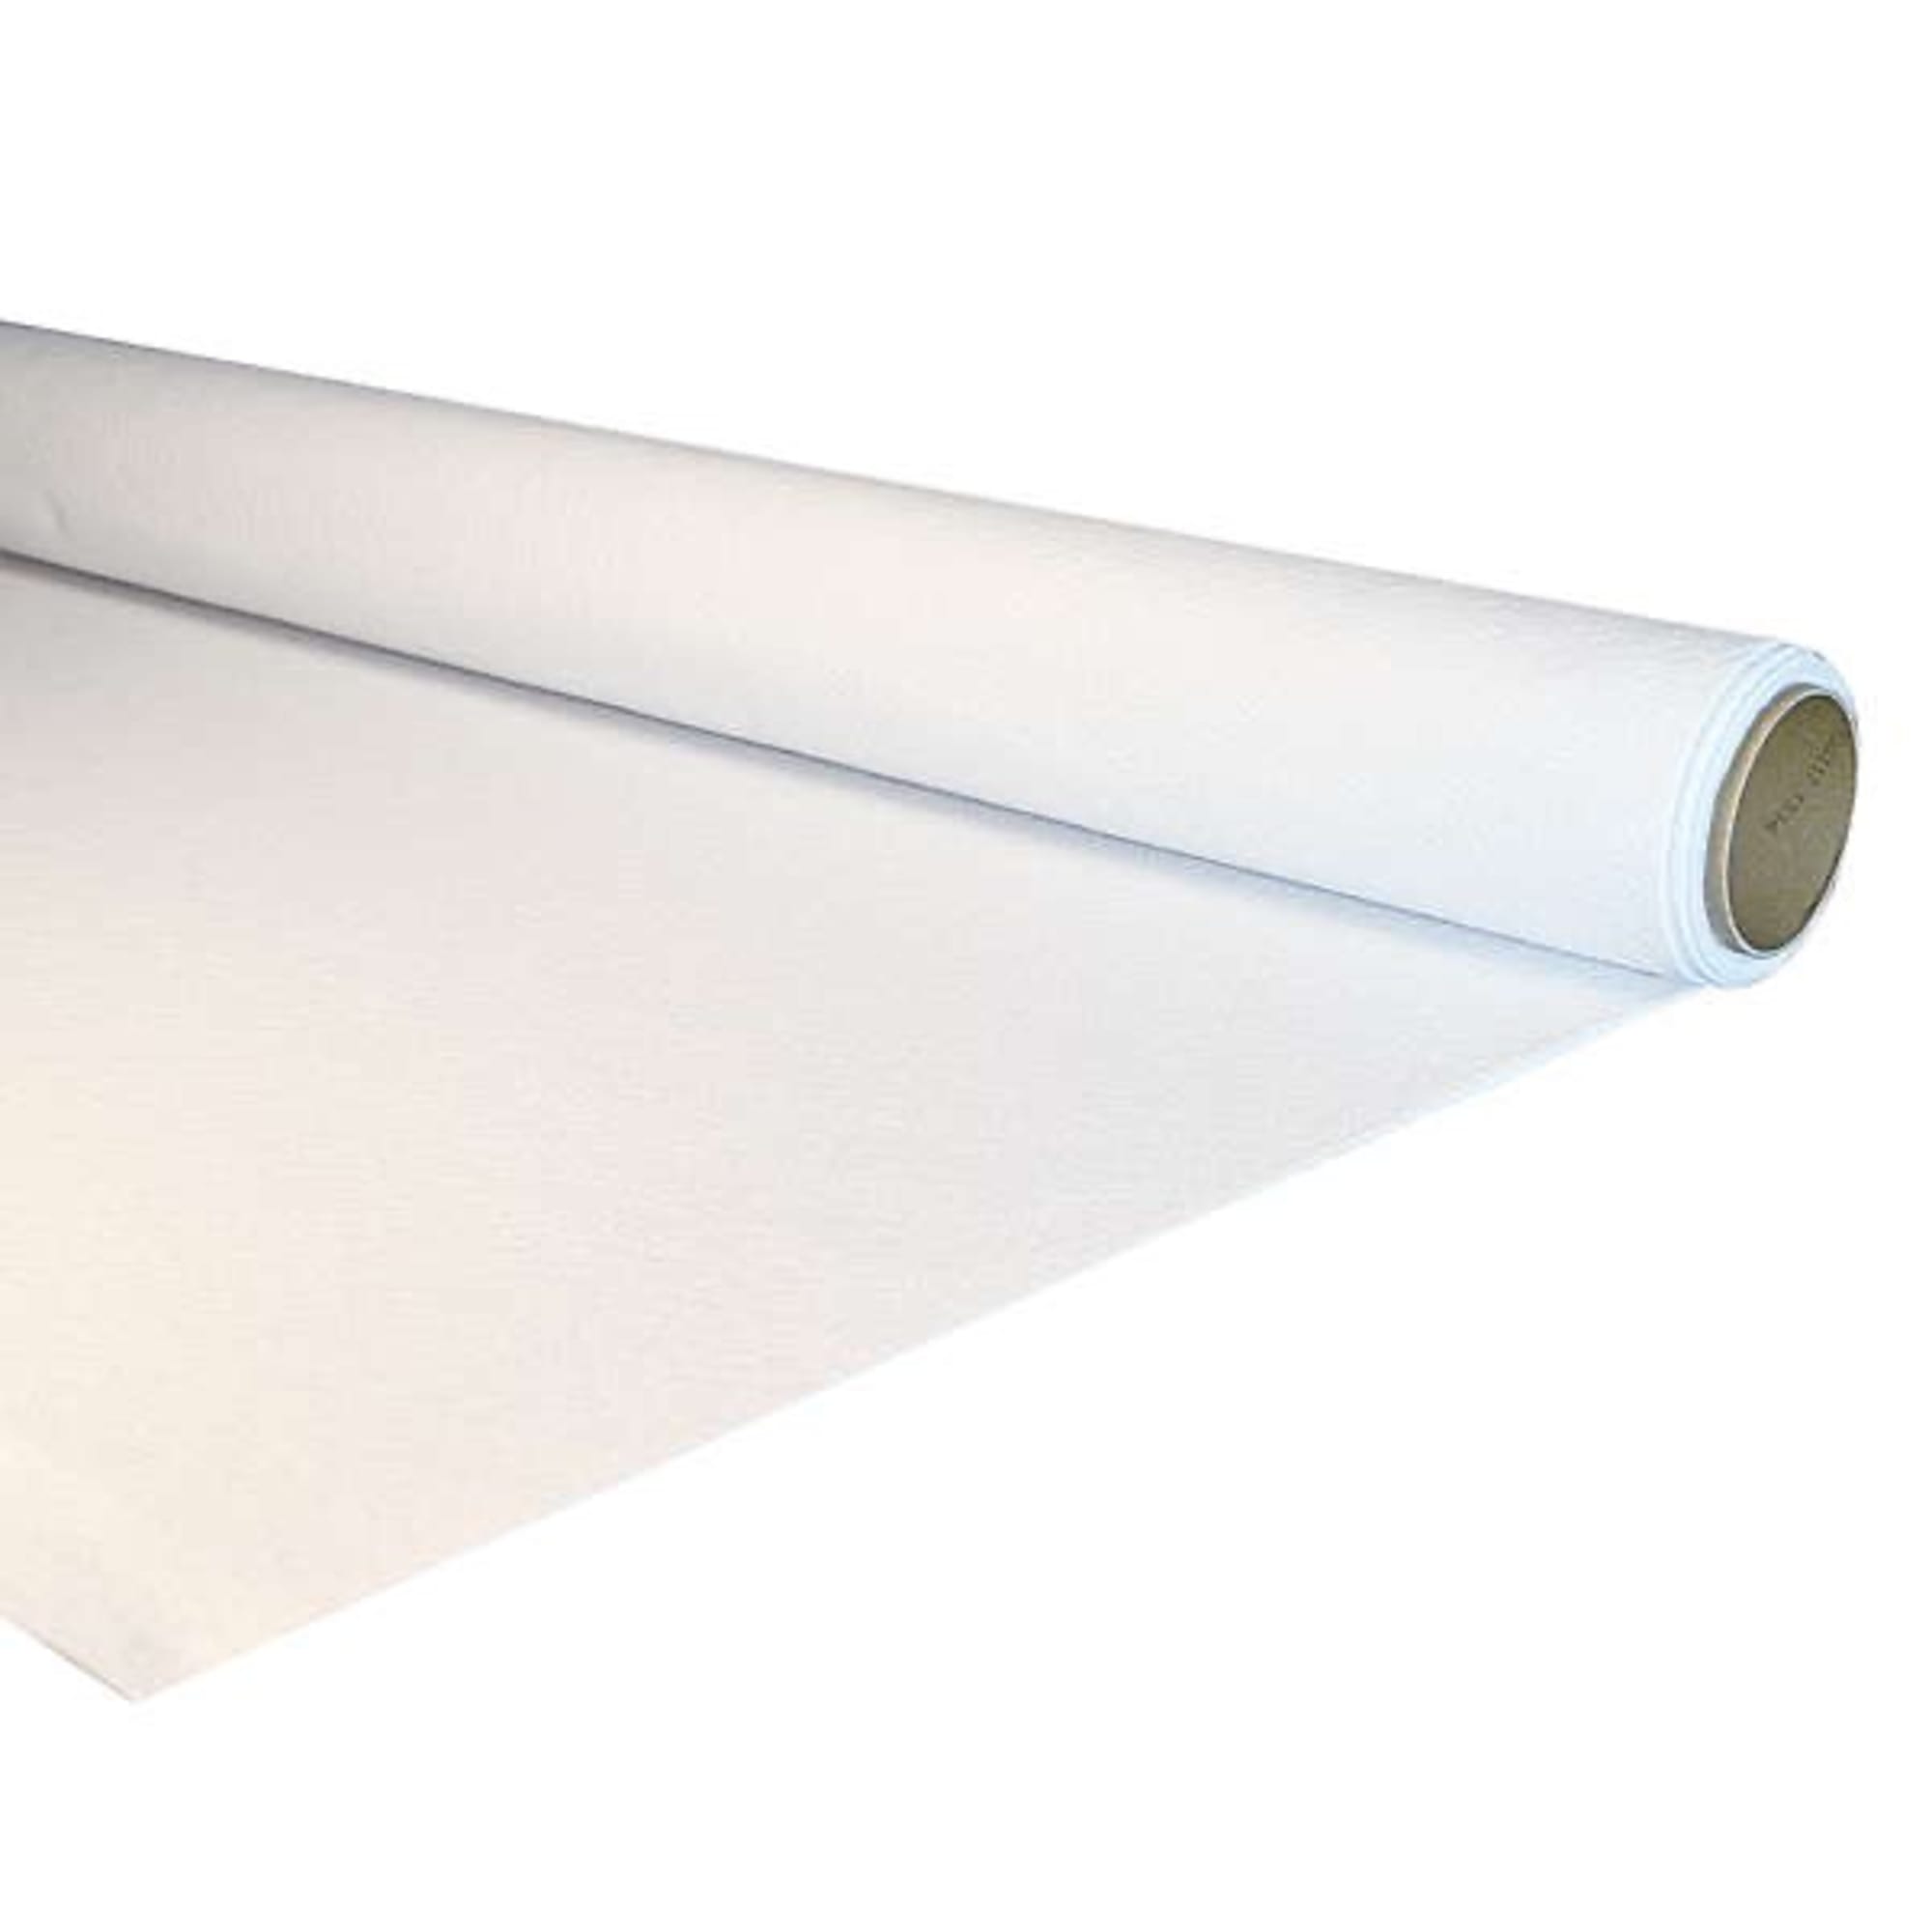 Breatex™ Non-woven absorber 300 g/m² , image 2